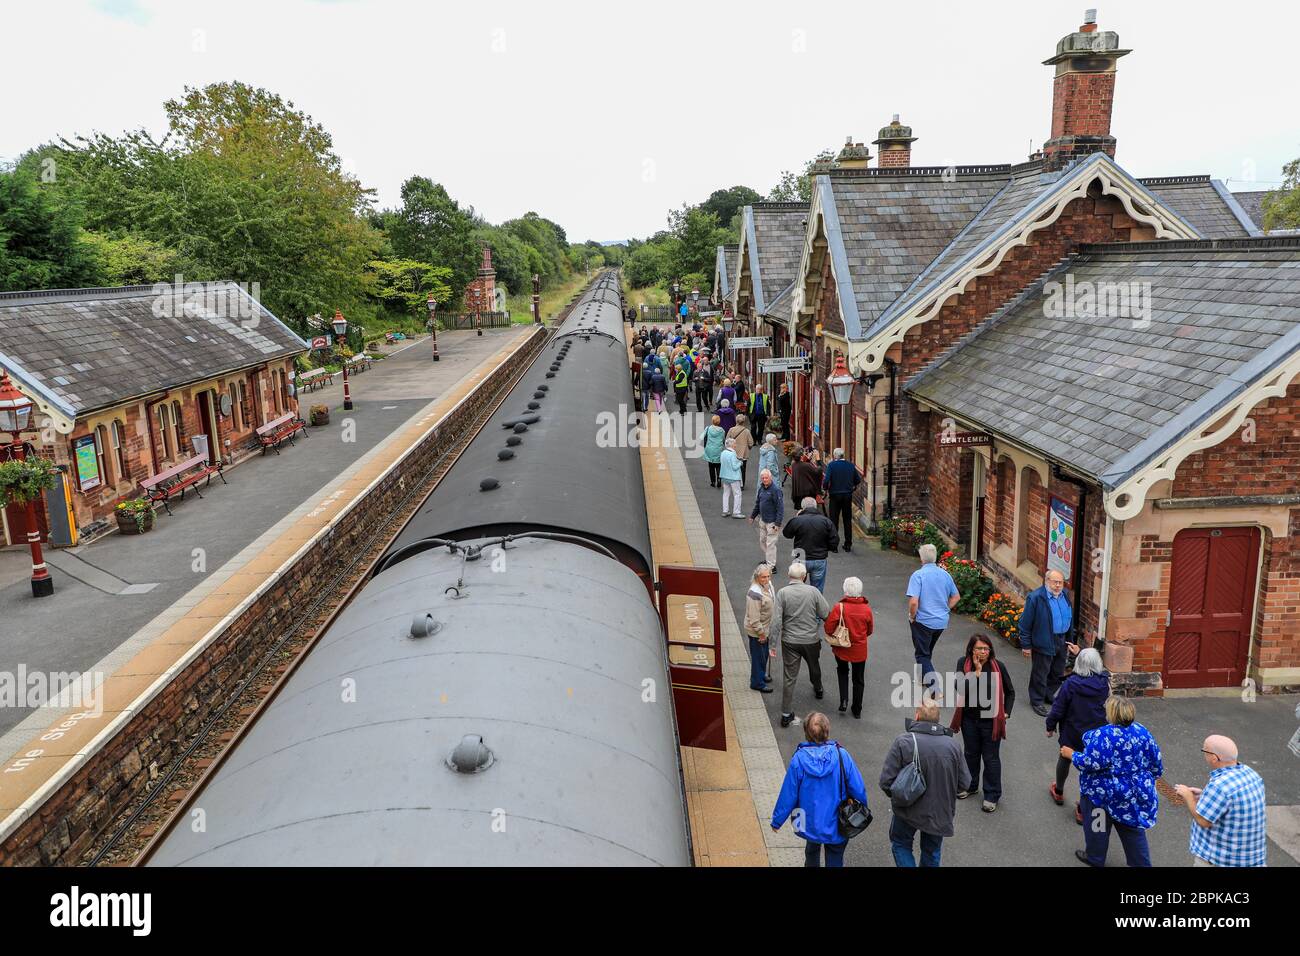 Pullman railway carriages being pulled by a steam engine special train at Appleby railway station Stock Photo